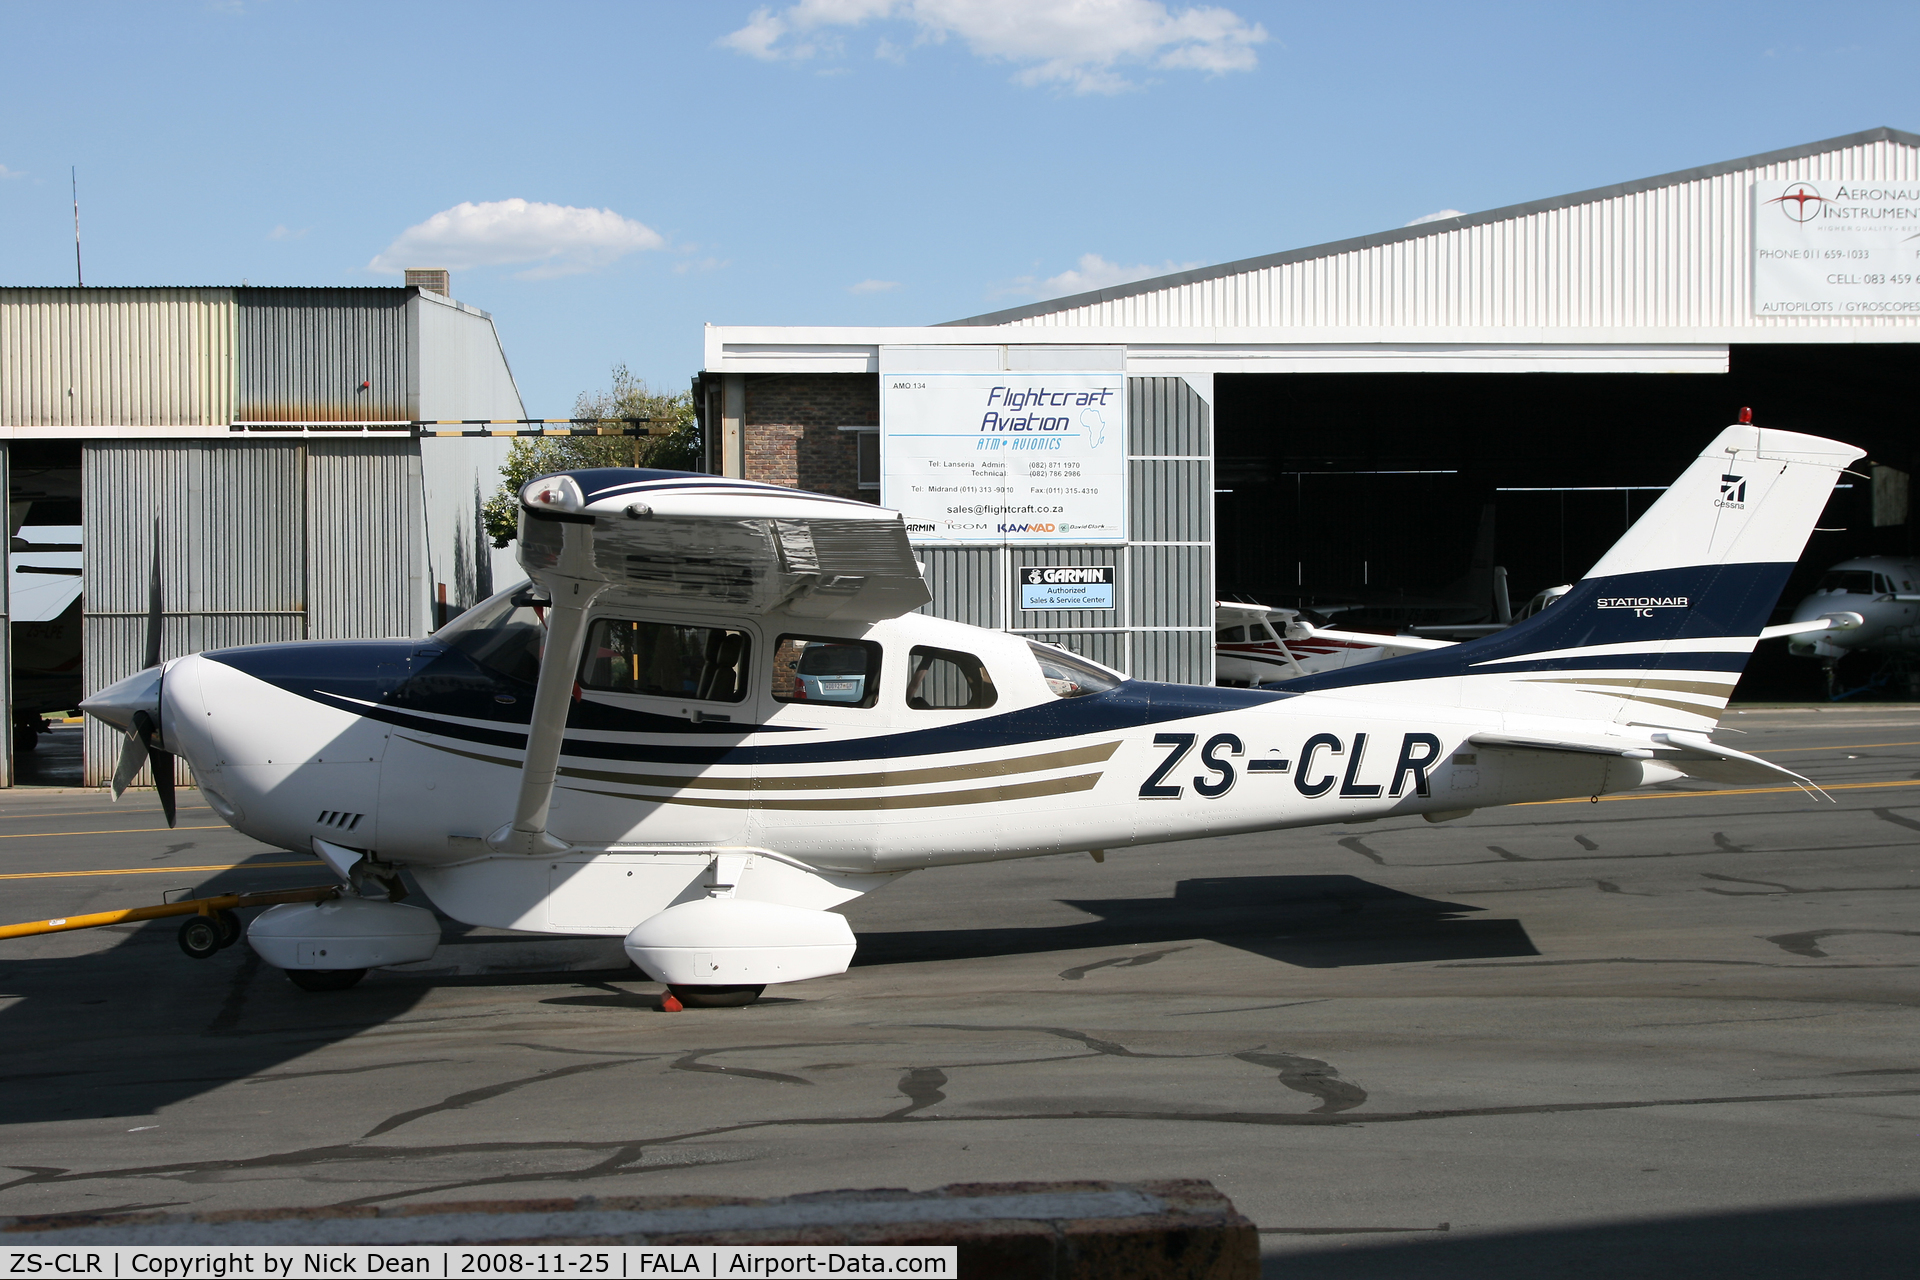 ZS-CLR, 2004 Cessna T206H Turbo Stationair C/N T20608508, FALA (W/O Jan 10th 2009 en-route Limpopo-Lanseria VMC into IMC with subsequent death spiral one soul on board fatal)